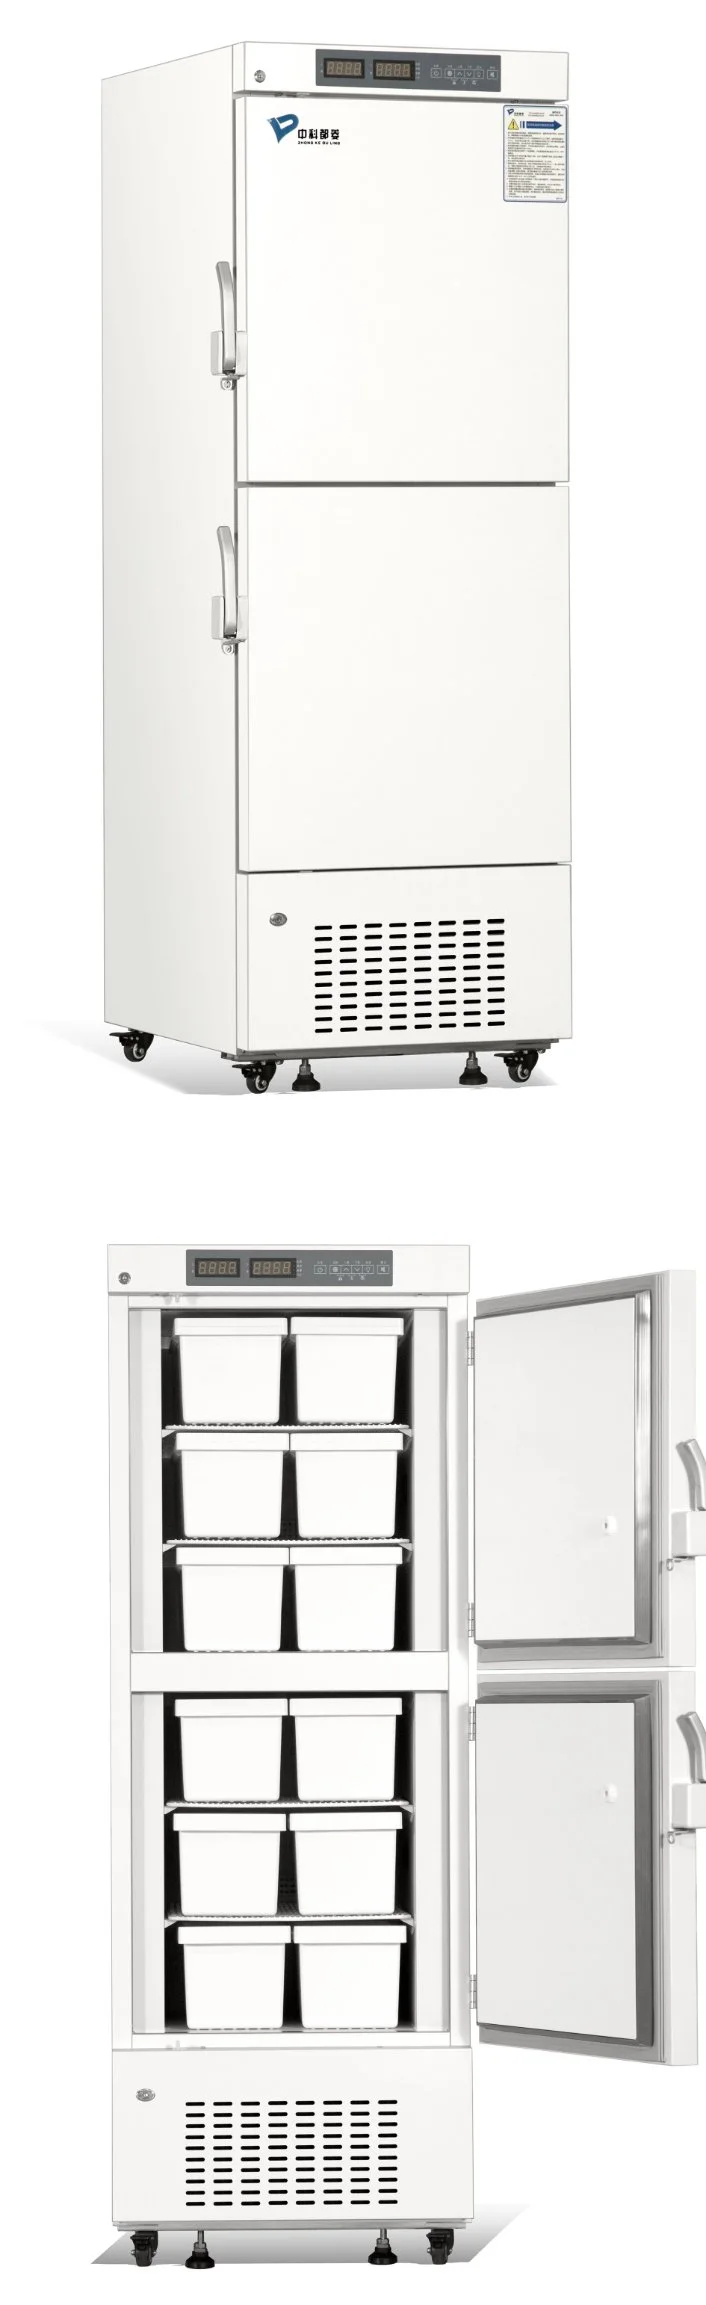 Energy Saving -25 Degrees Upright 358 Liters Medical Deep Freezer with Multi Drawers